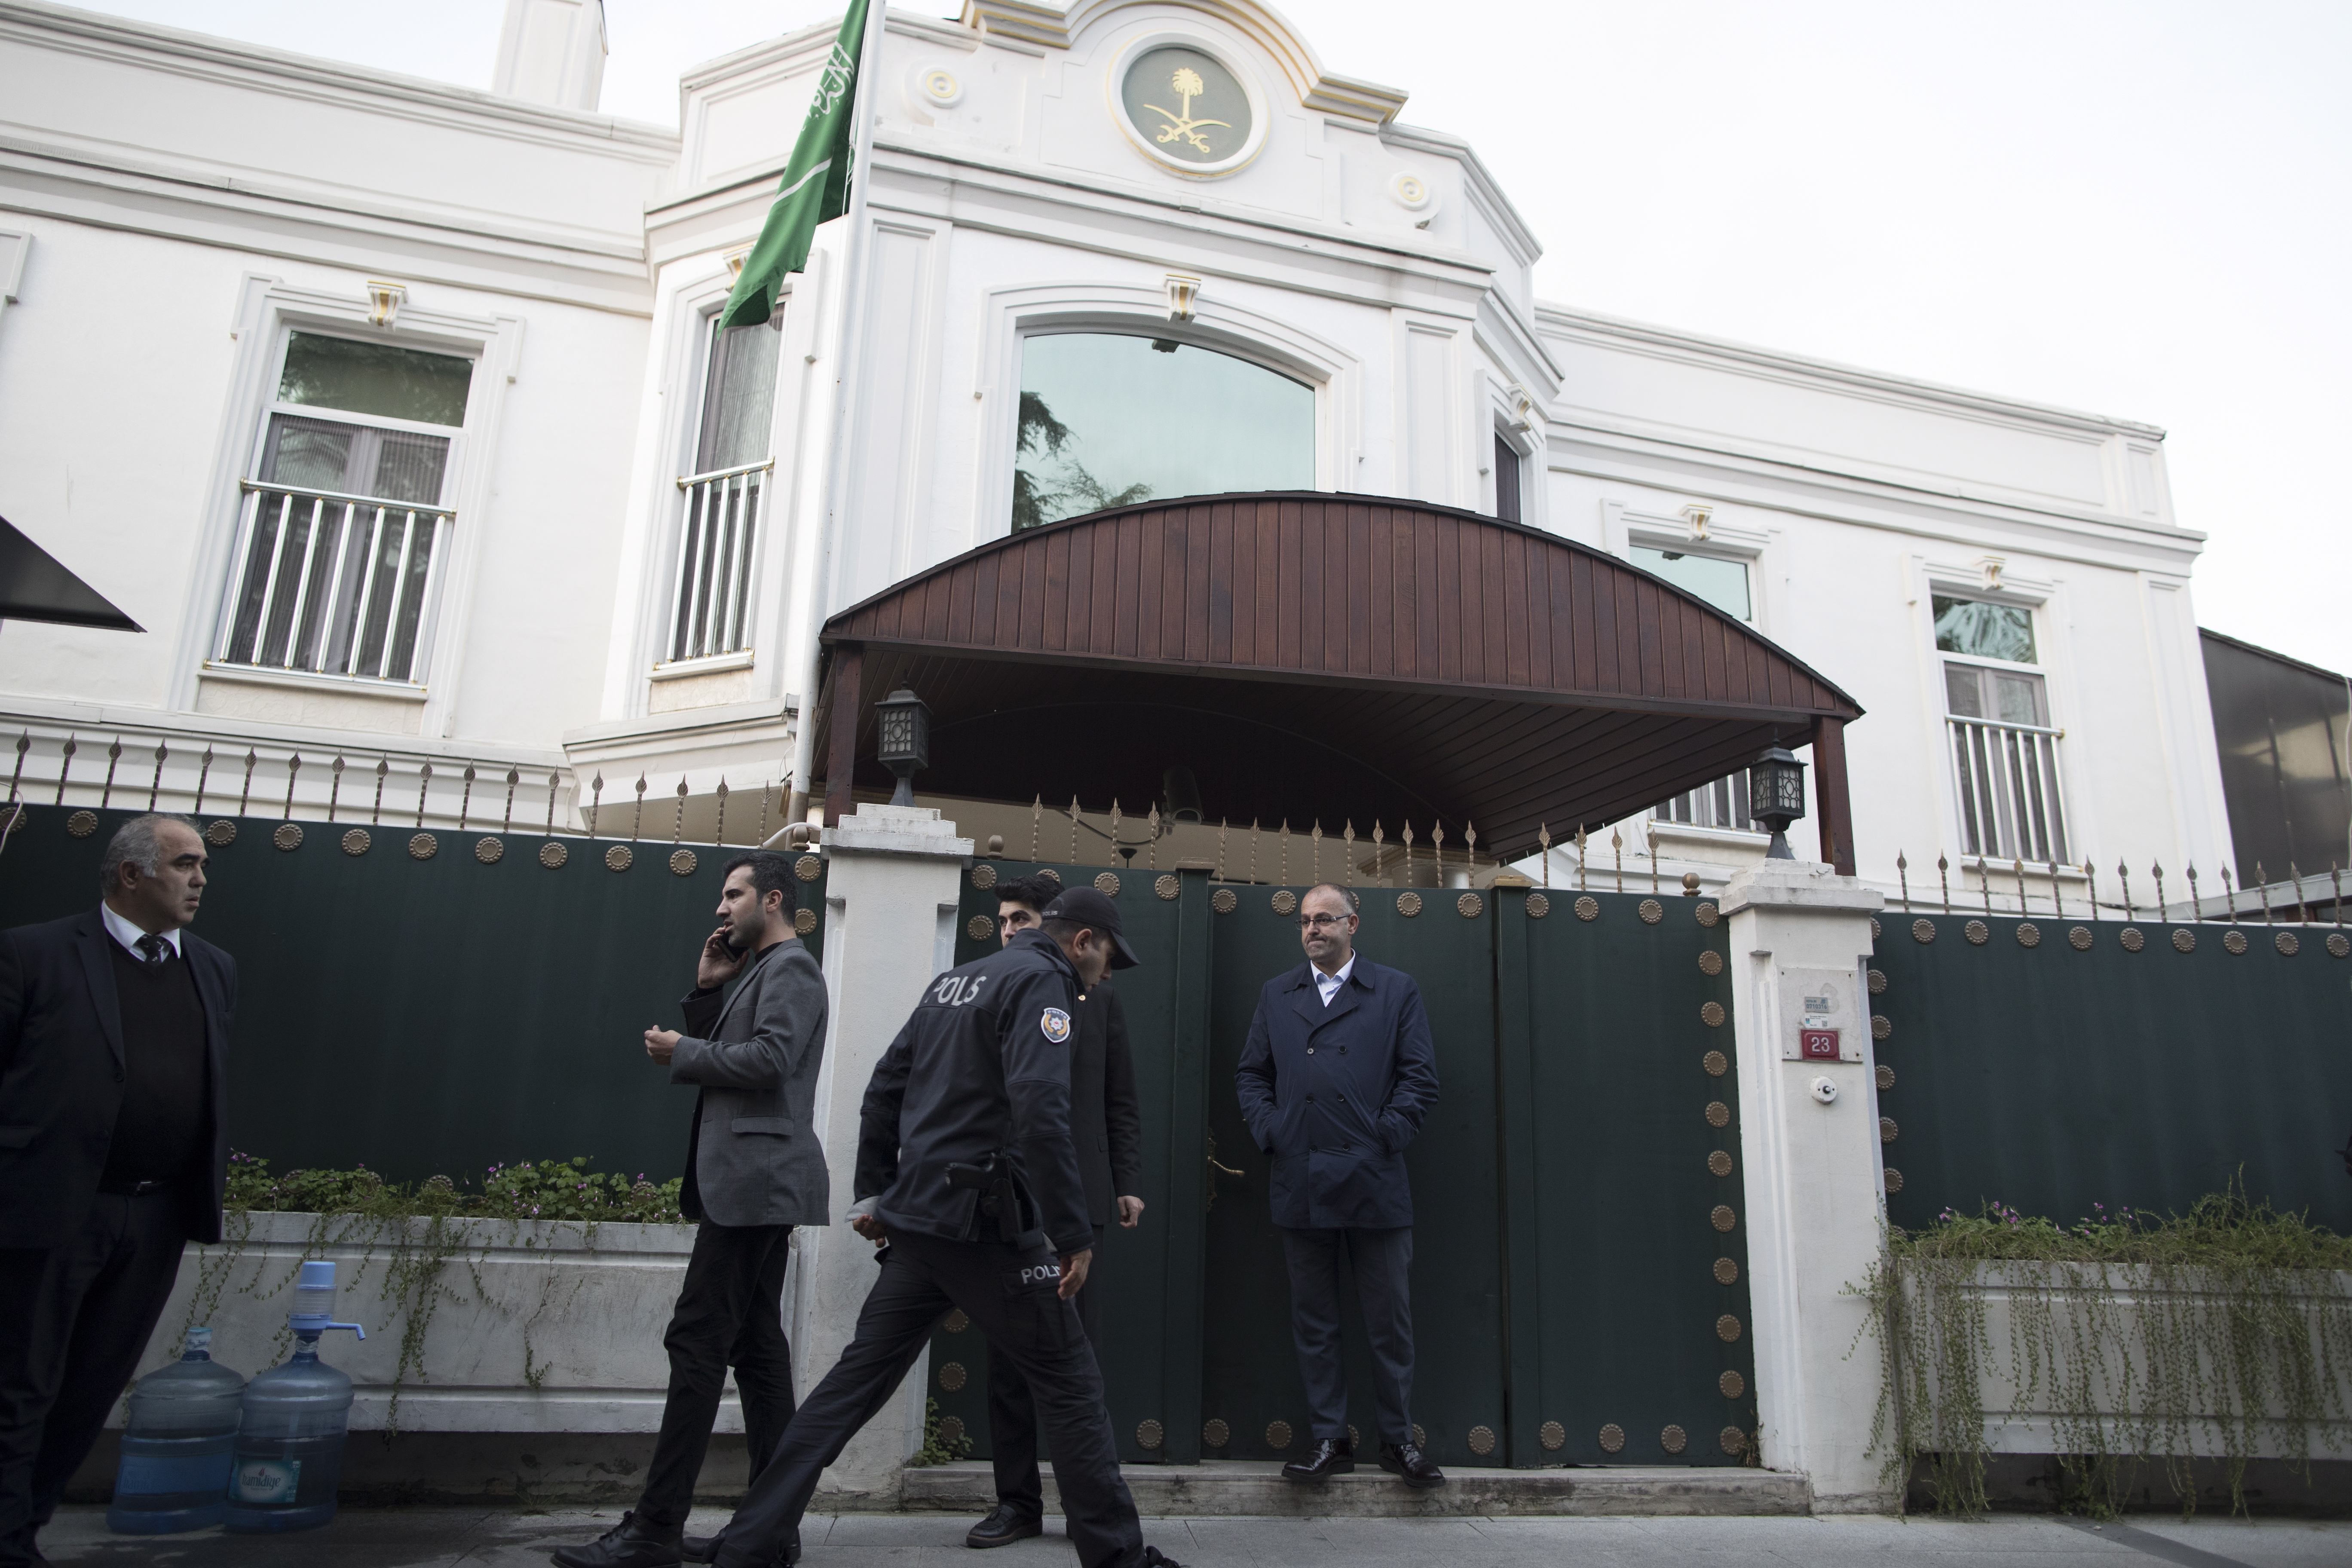 epa07097761 Turkish forensic police officers arrive for investigation the residence of the Saudi consul in Istanbul, Turkey, 16 October 2018. According to local media reports, al-Otaibi has left Turkey. A Turkish prosecutor on 15 October has entered the Saudi consulate in Istanbul to investigate the disappearance of dissident Saudi journalist Jamal Khashoggi, an inspection that was being carried out jointly with a Saudi team. Khashoggi went missing on 02 October when he entered the Saudi consulate to pick up paperwork.  EPA/TOLGA BOZOGLU